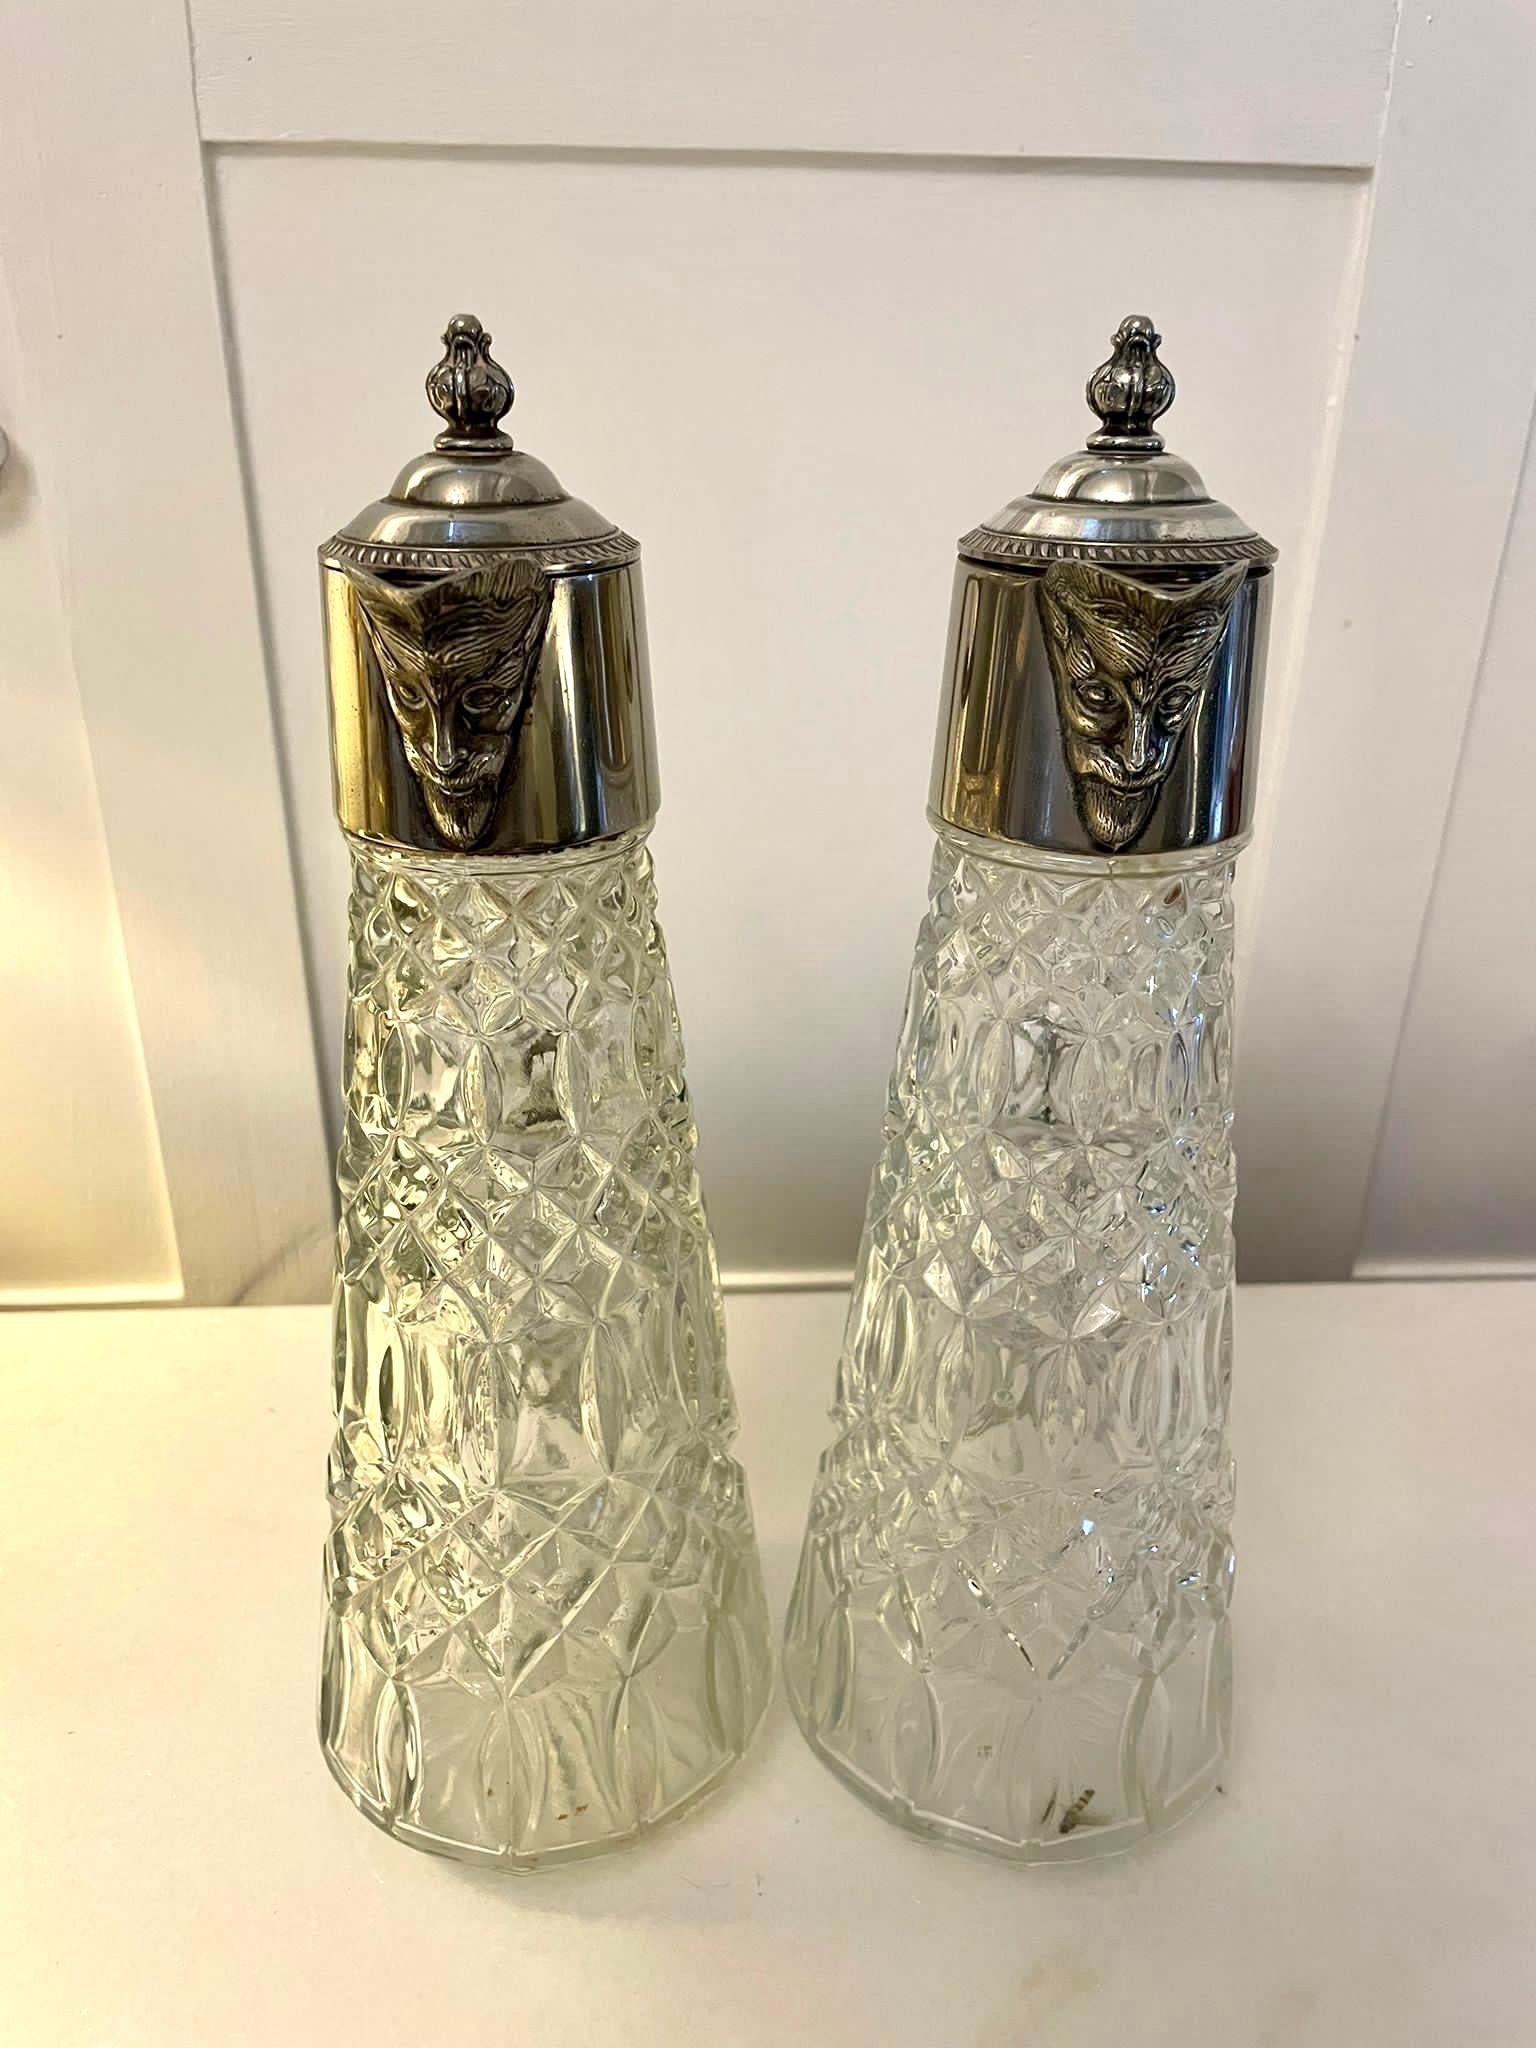 Pair of Antique Edwardian Quality Silver Plated and Cut Glass Claret Jugs For Sale 4